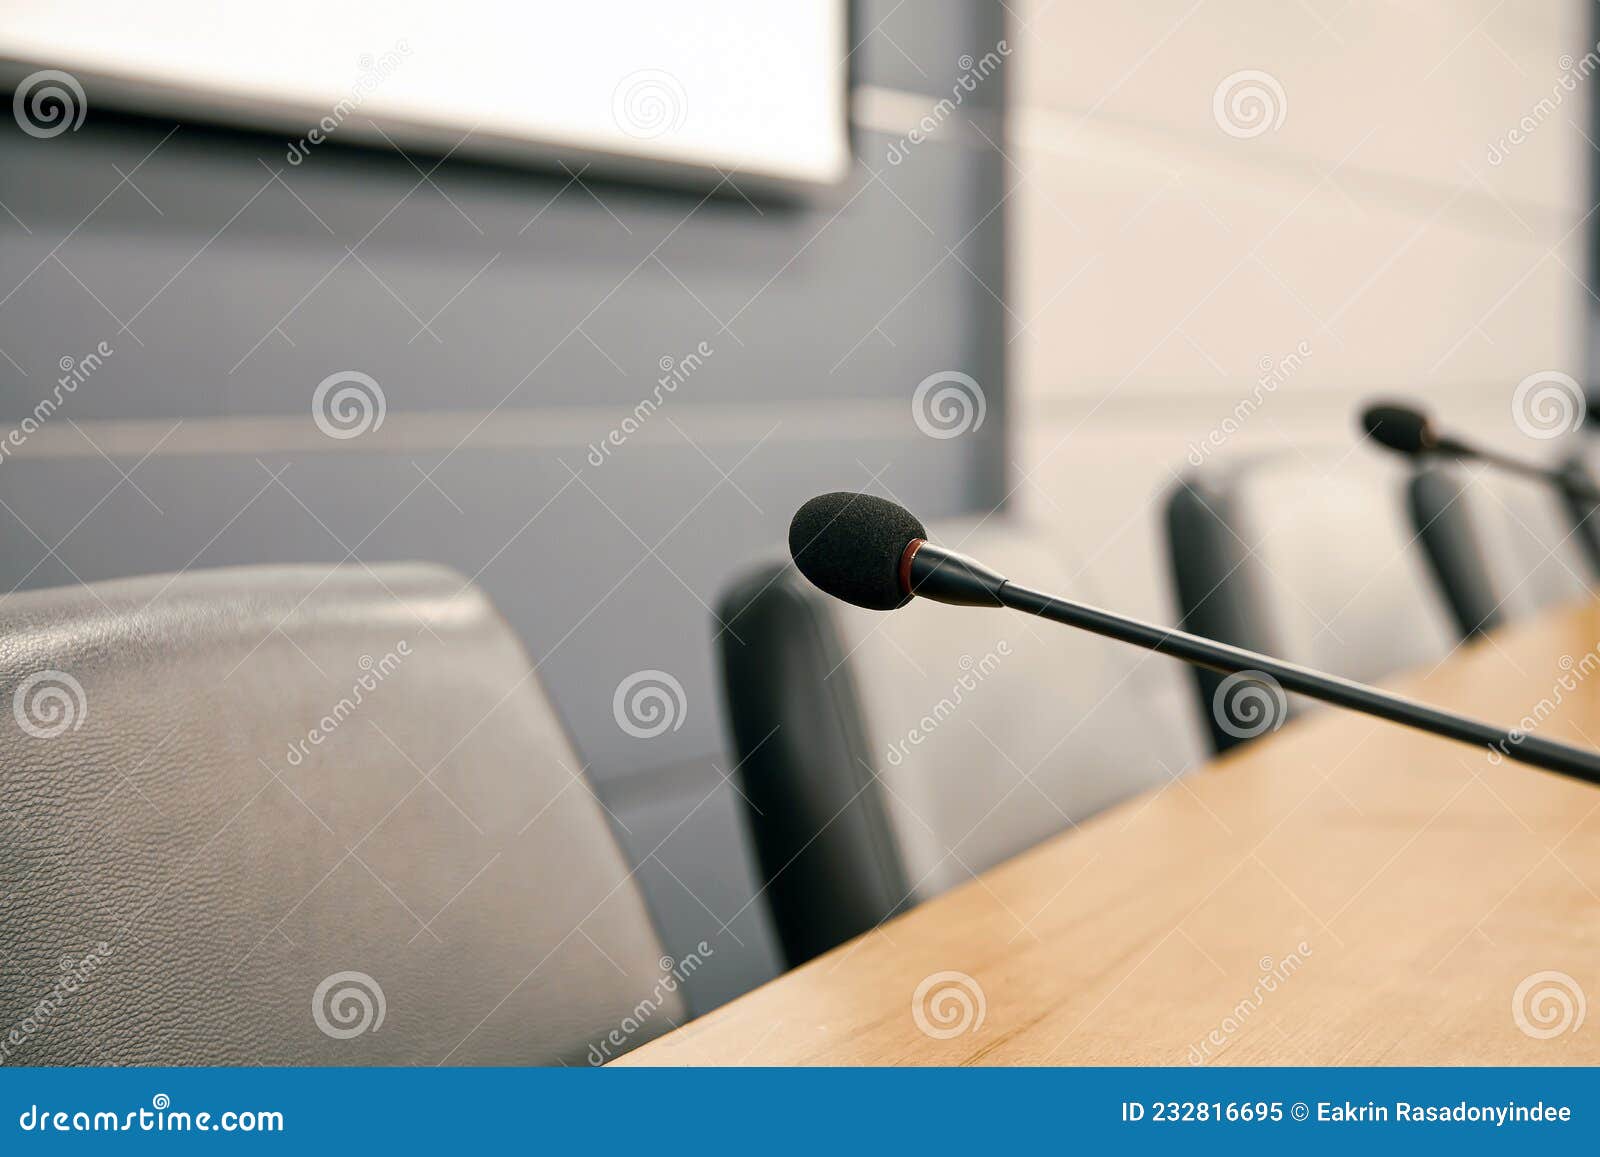 Close Up The Conference Microphone On The Meeting Table Or Board